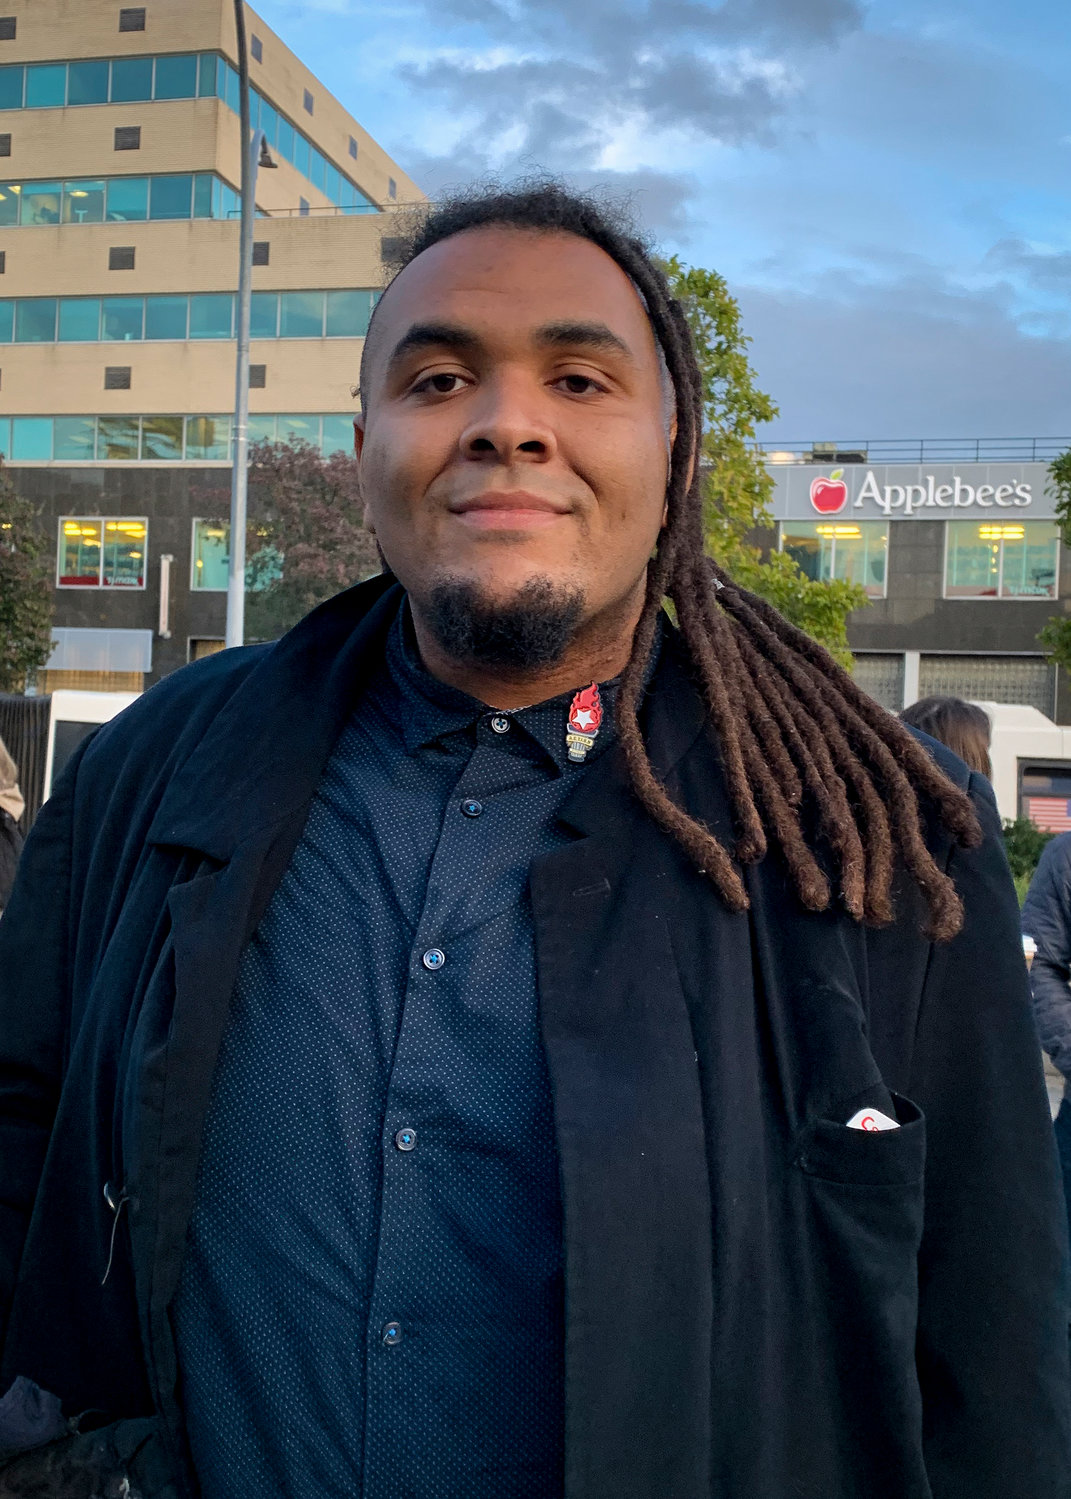 Victor Davila — who leads The Point Community Development Corp. — rallied with several local organizations for climate justice last week in Fordham Plaza. Davila and other advocates pushed for passage of the Climate and Community Investment Act early next year.